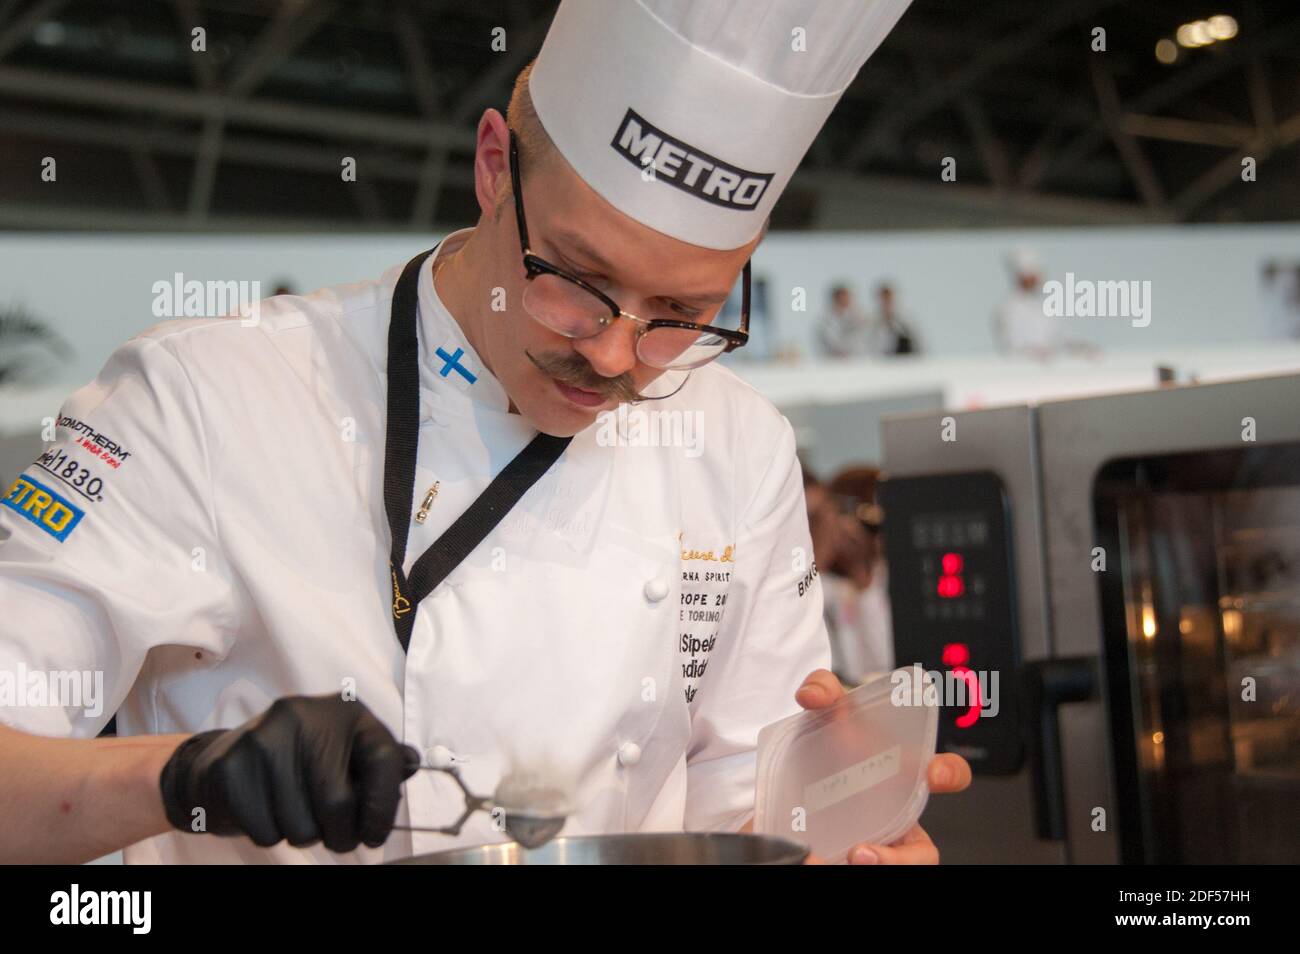 06/12/2018 Turin (Italy) Ismo Sipelainen engaged in the preparation of a refined dish during the Bocuse d'Or Stock Photo